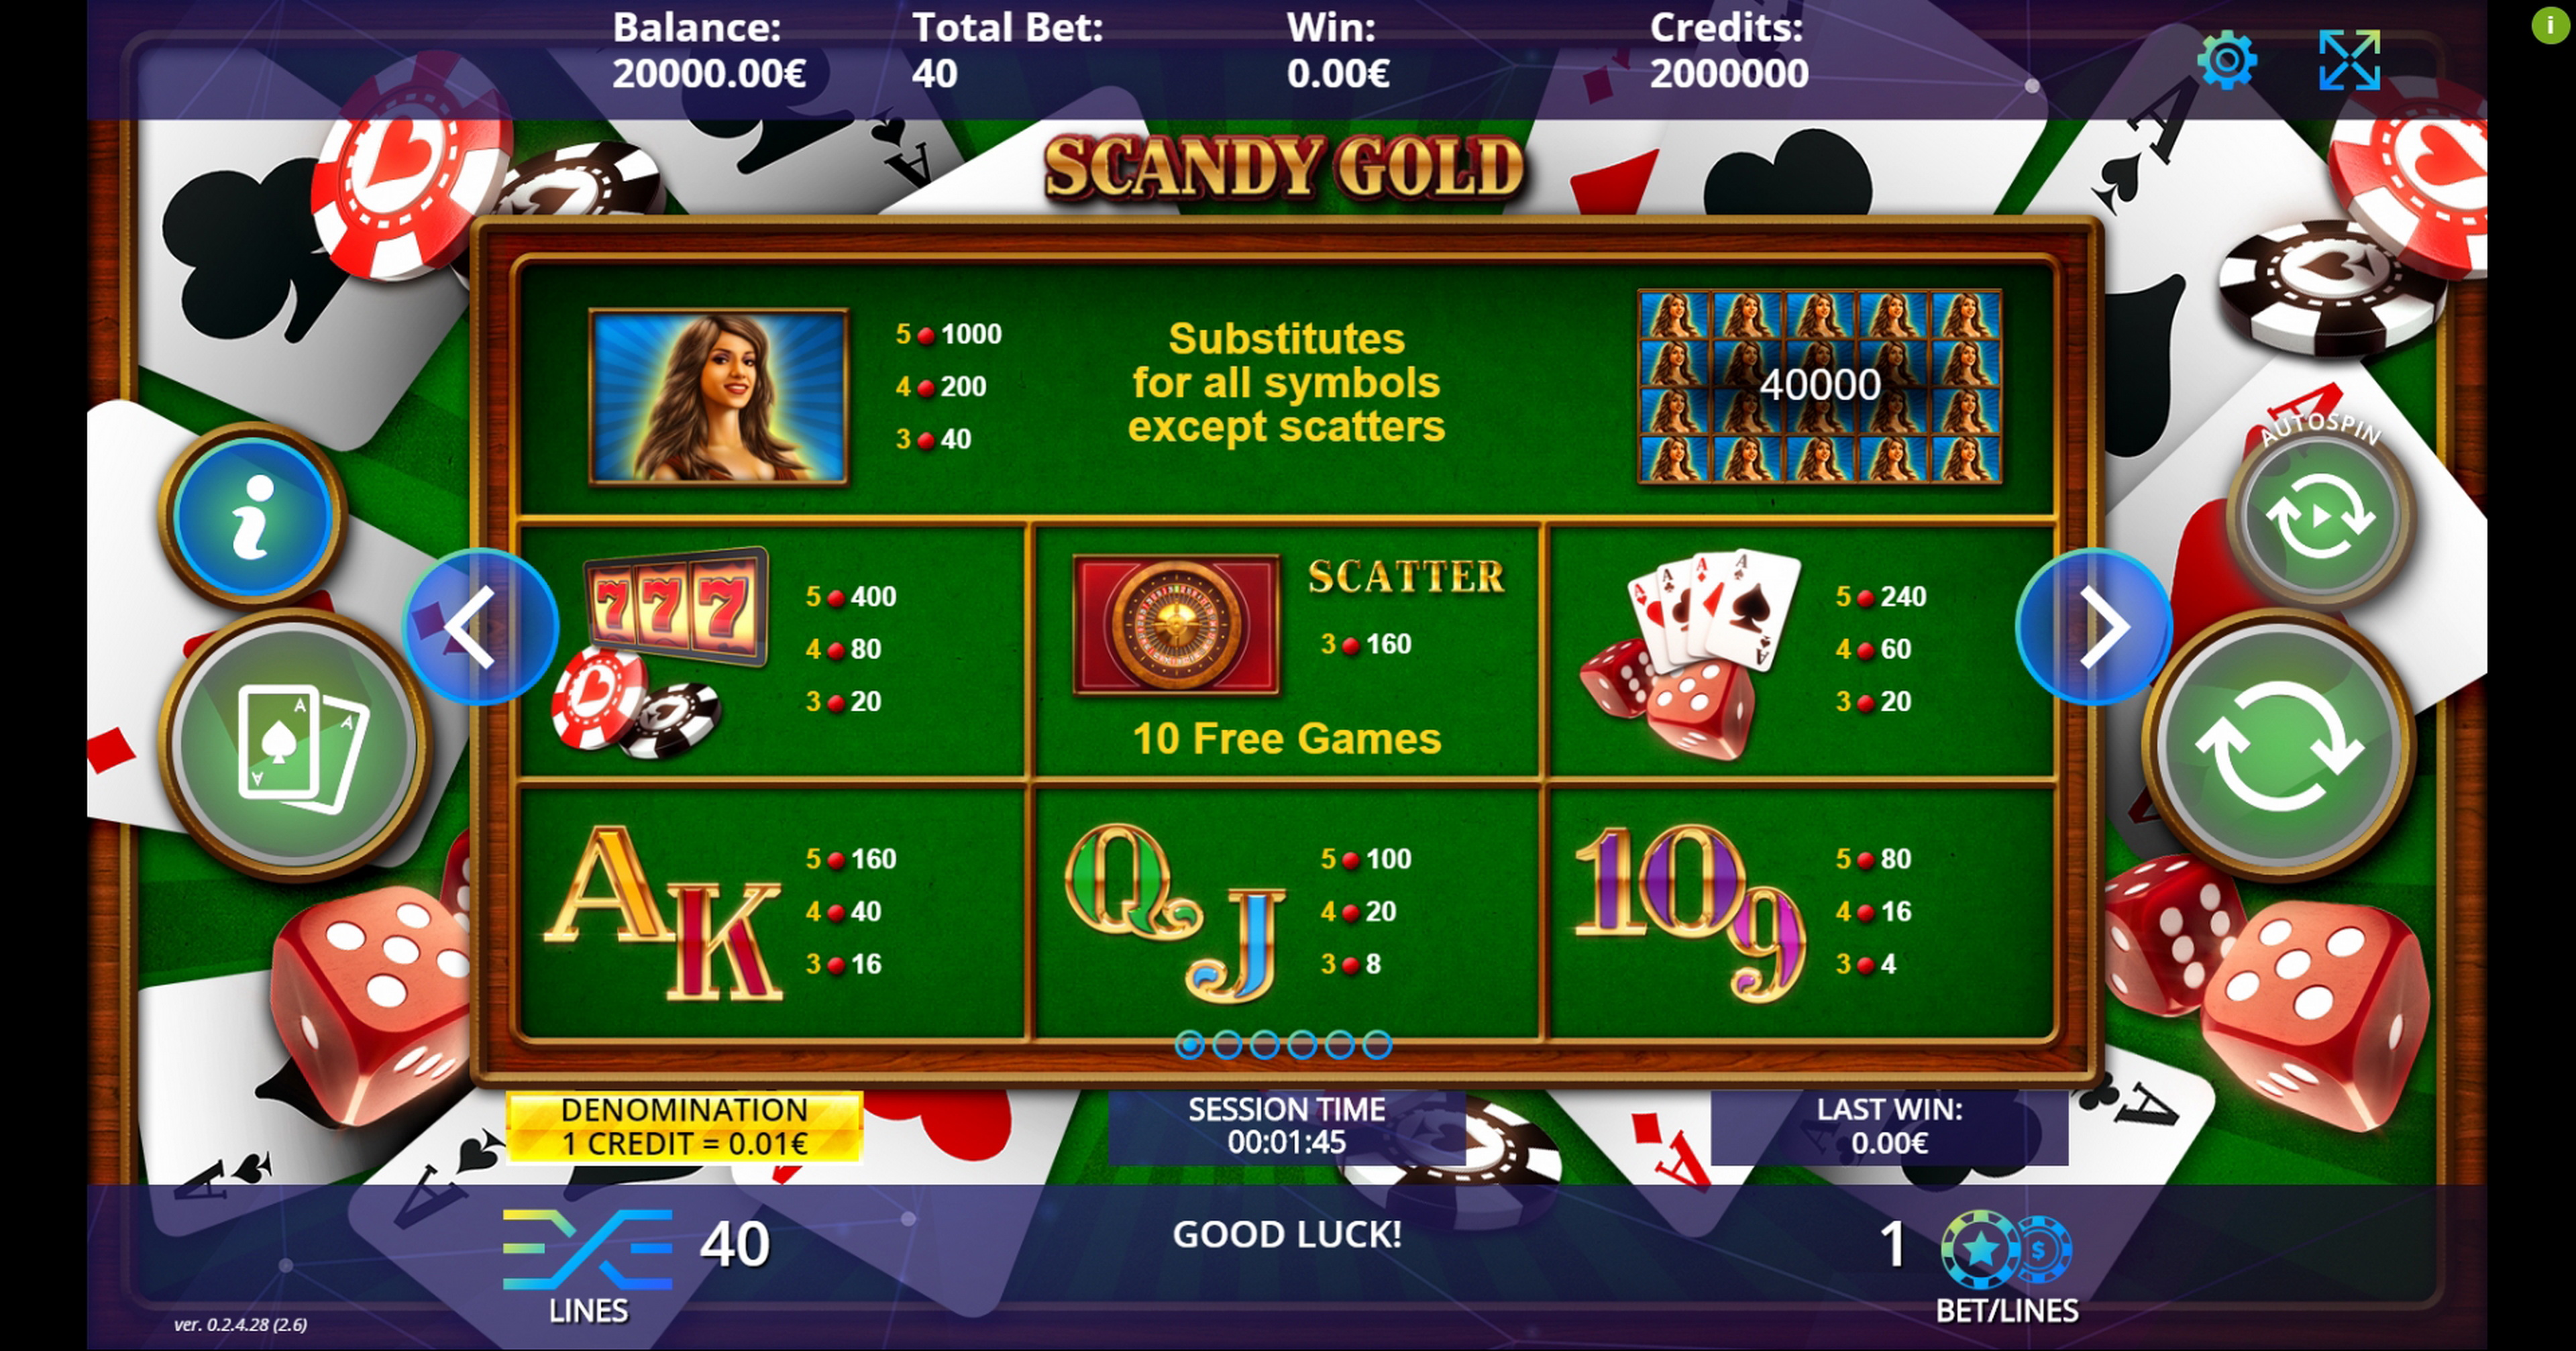 Info of Scandy Gold Slot Game by DLV